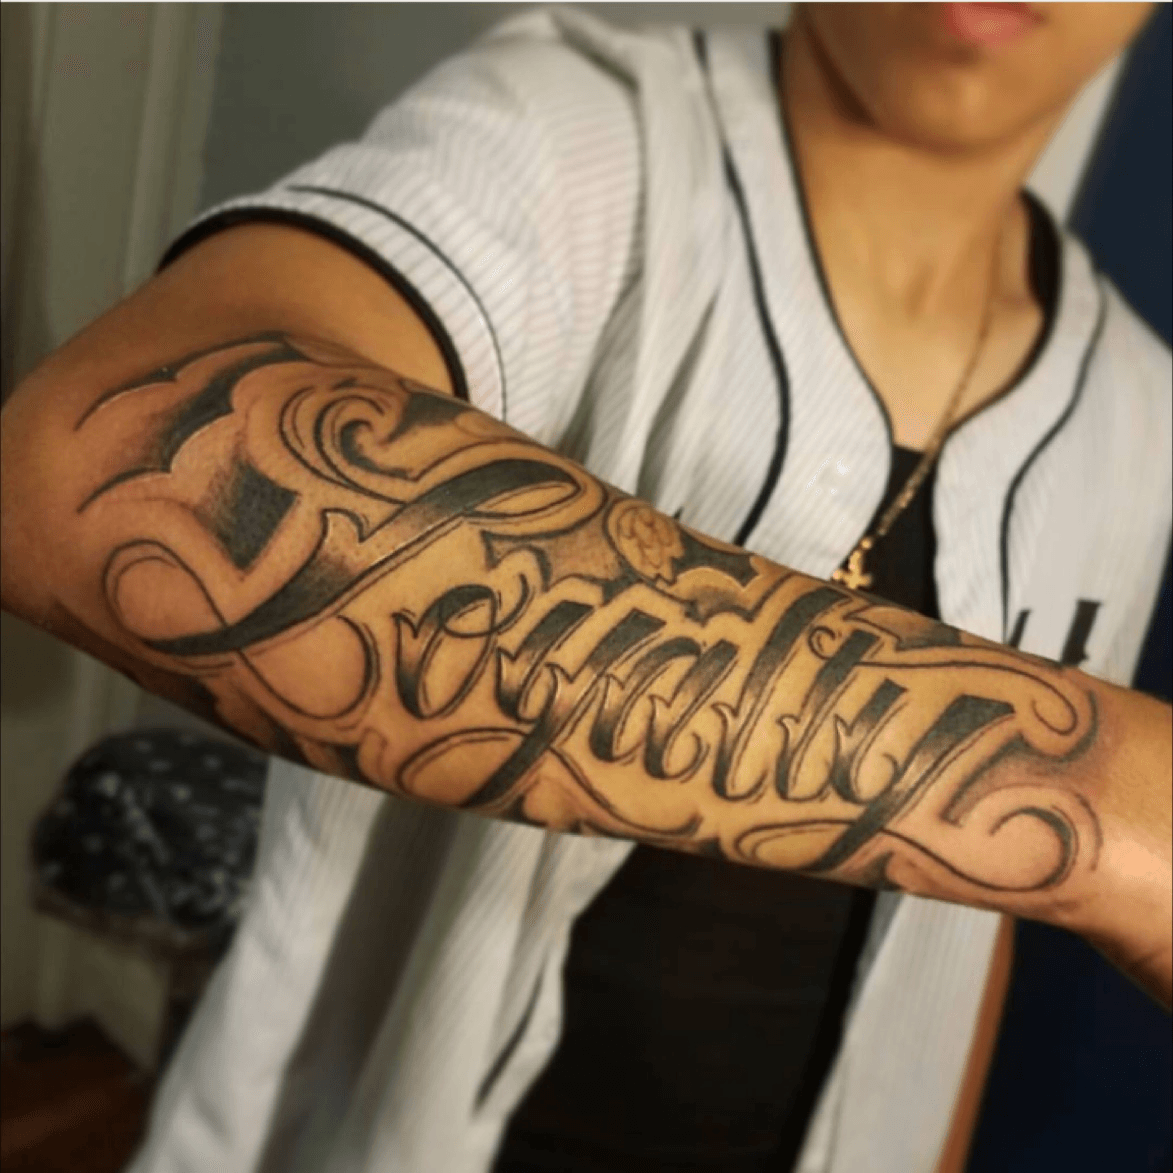 Details more than 71 forearm loyalty tattoo  thtantai2